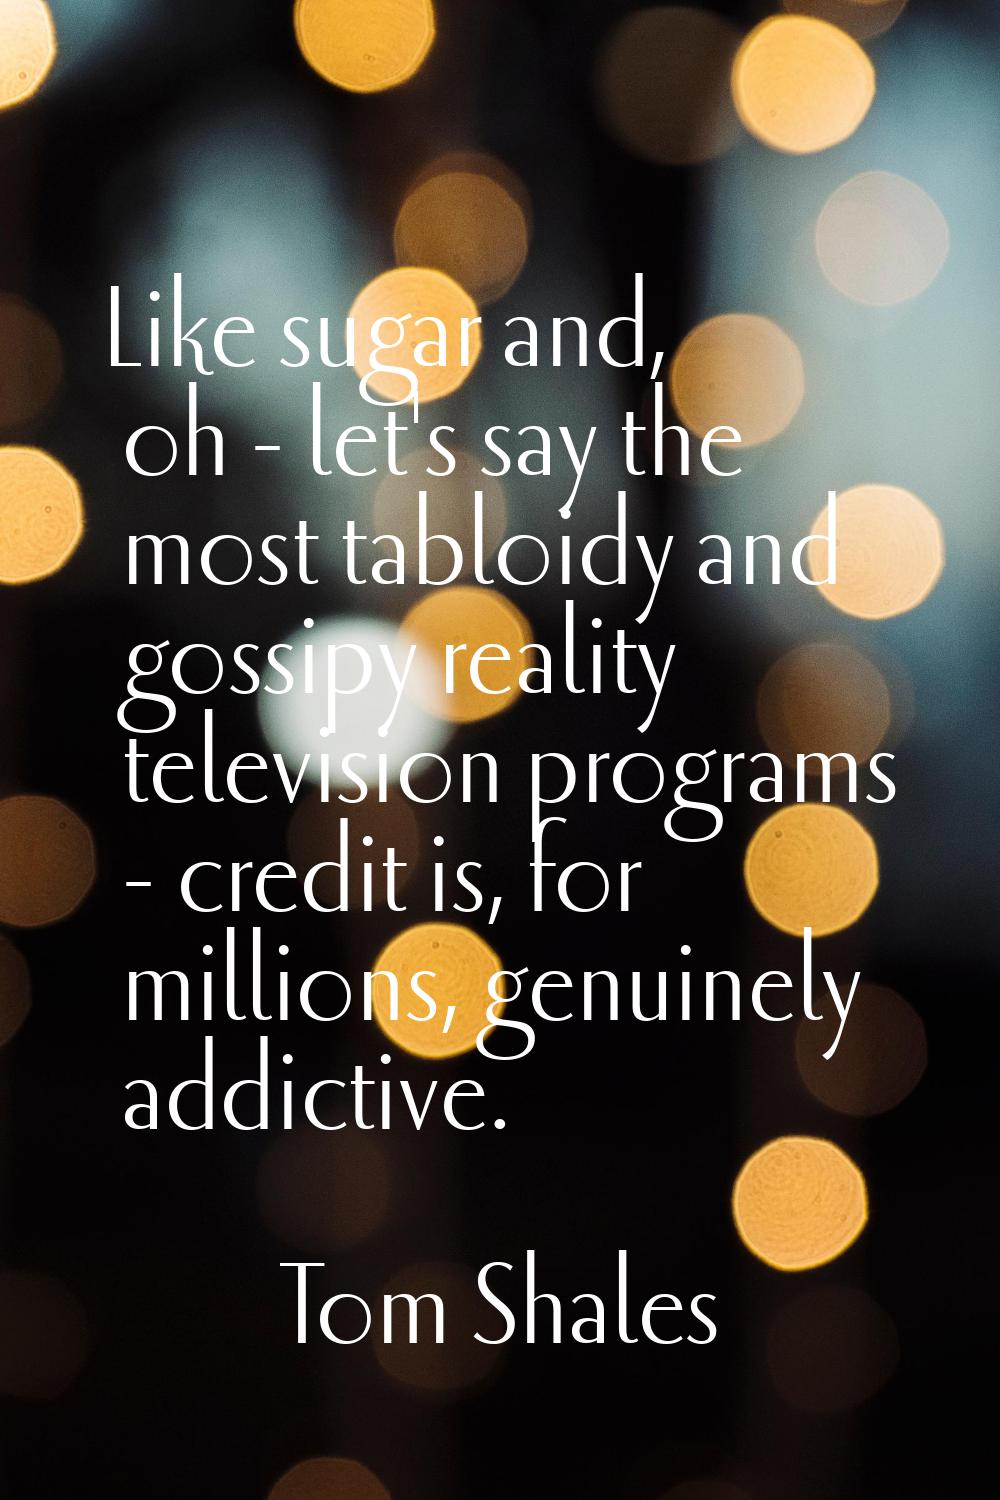 Like sugar and, oh - let's say the most tabloidy and gossipy reality television programs - credit i